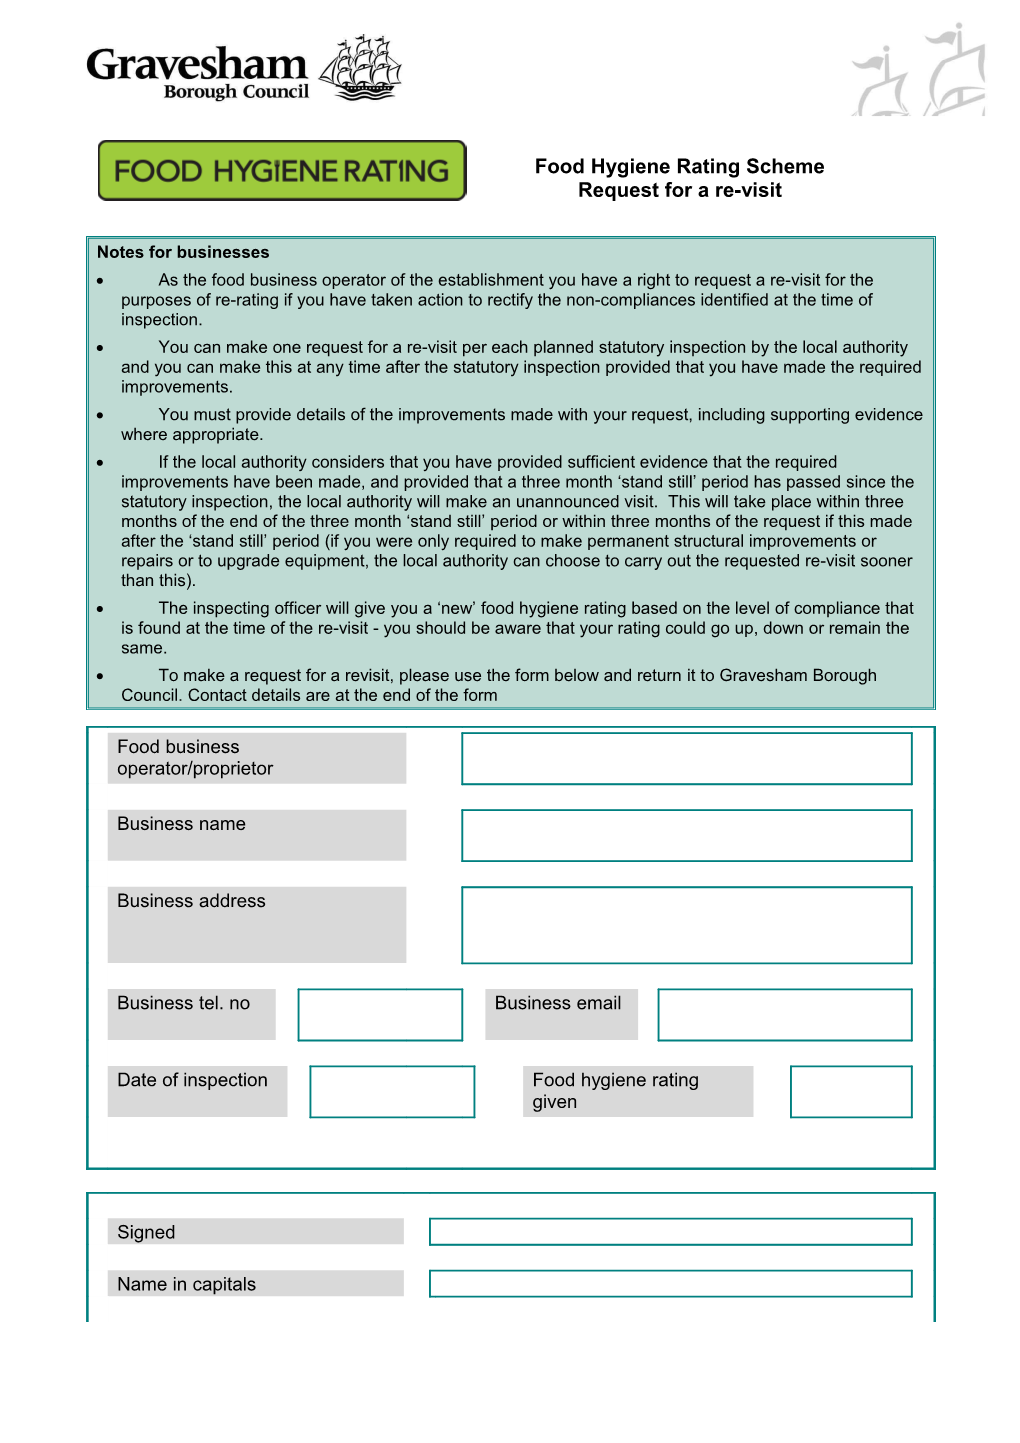 Please Now Return This Form To